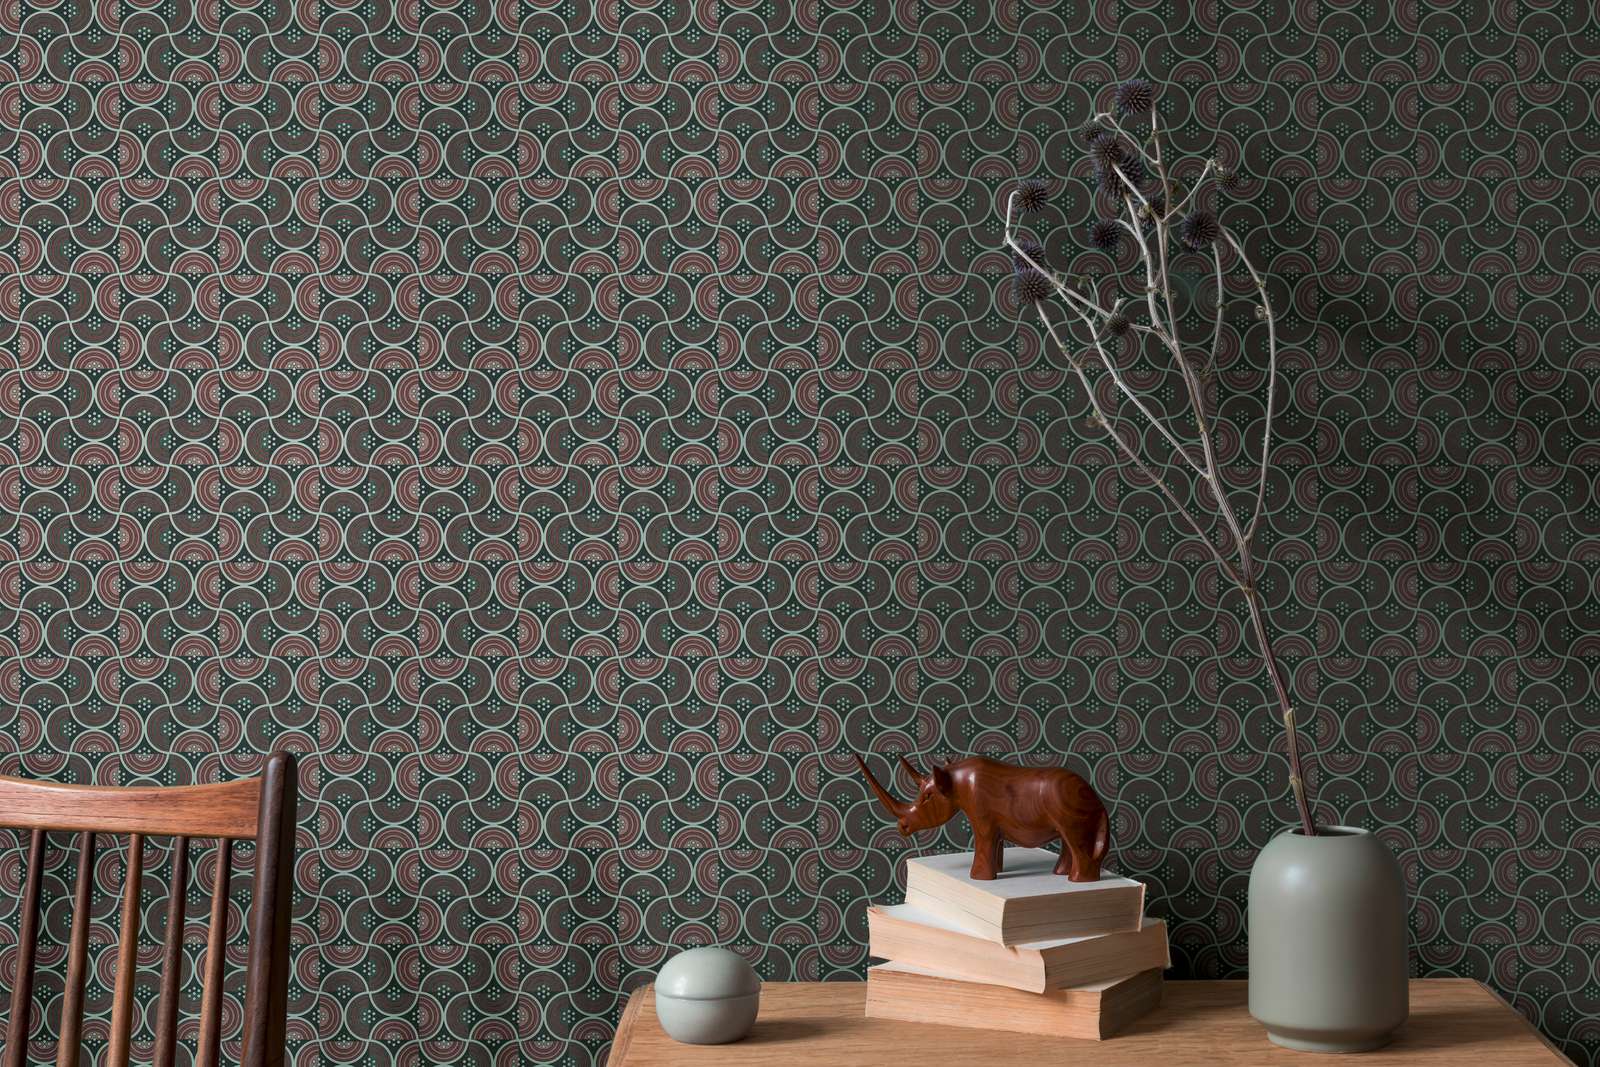             Non-woven wallpaper with dots and semicircles geometric pattern - red, green, black
        